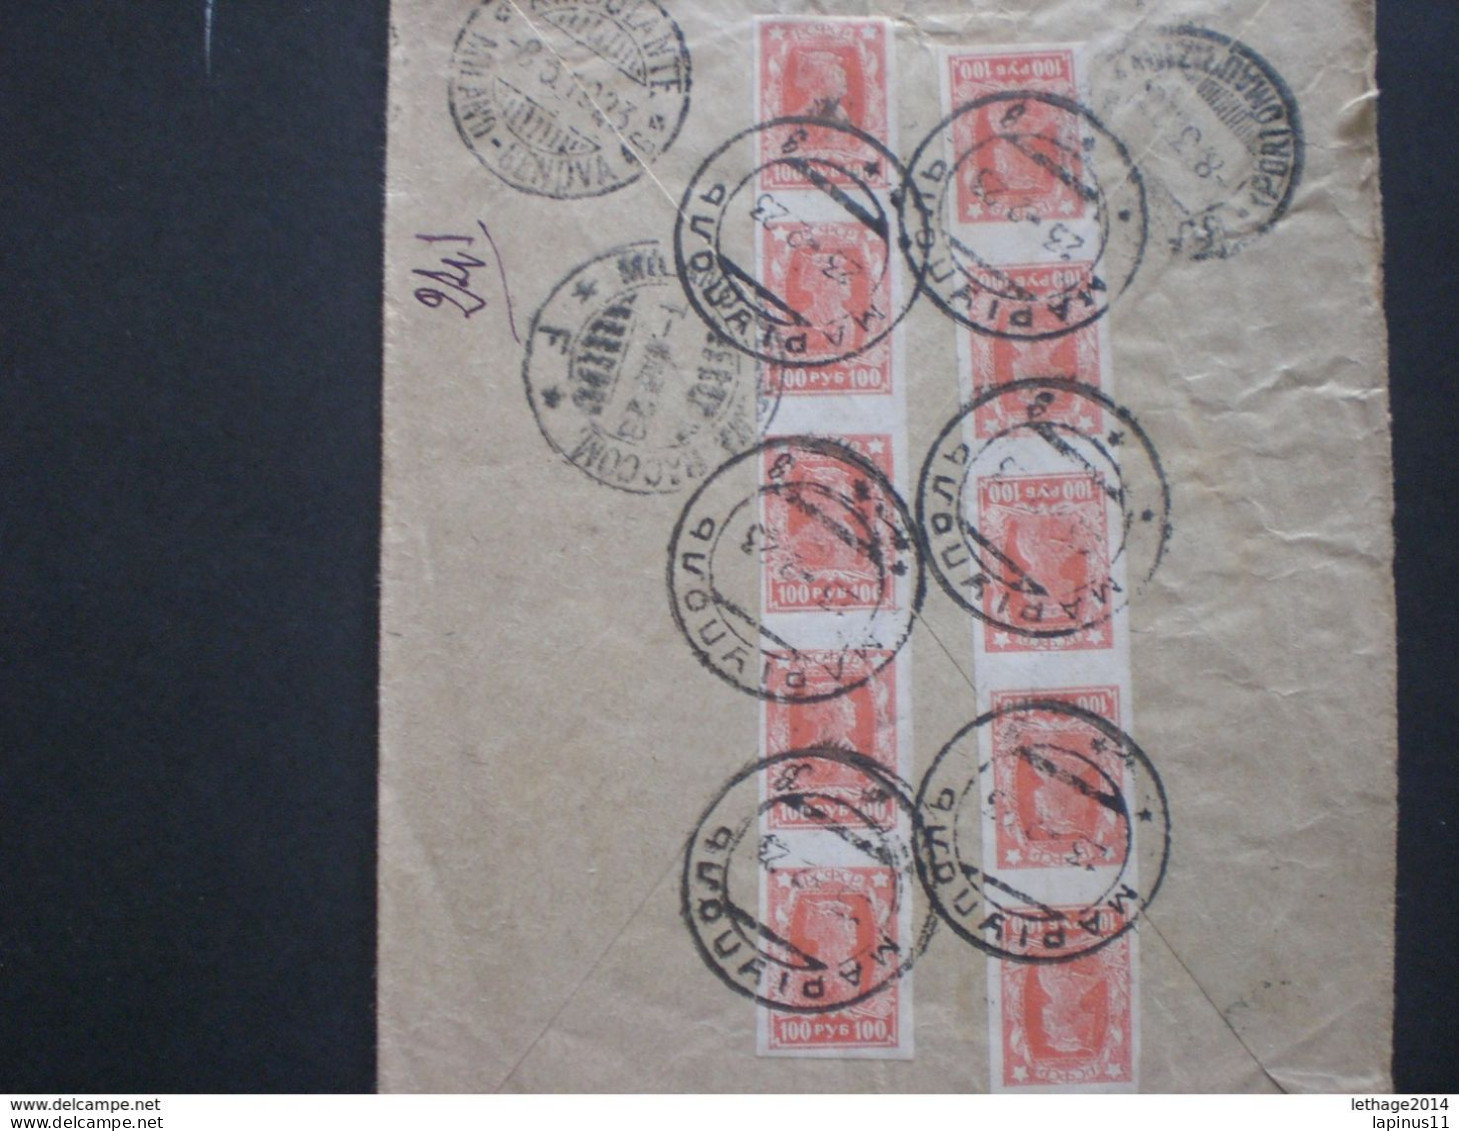 RUSSIA RUSSIE РОССИЯ STAMPS COVER 1923 REGISTER MAIL RUSSLAND TO ITALY OVER STAMPS RRR RIF. TAGG (178) - Briefe U. Dokumente